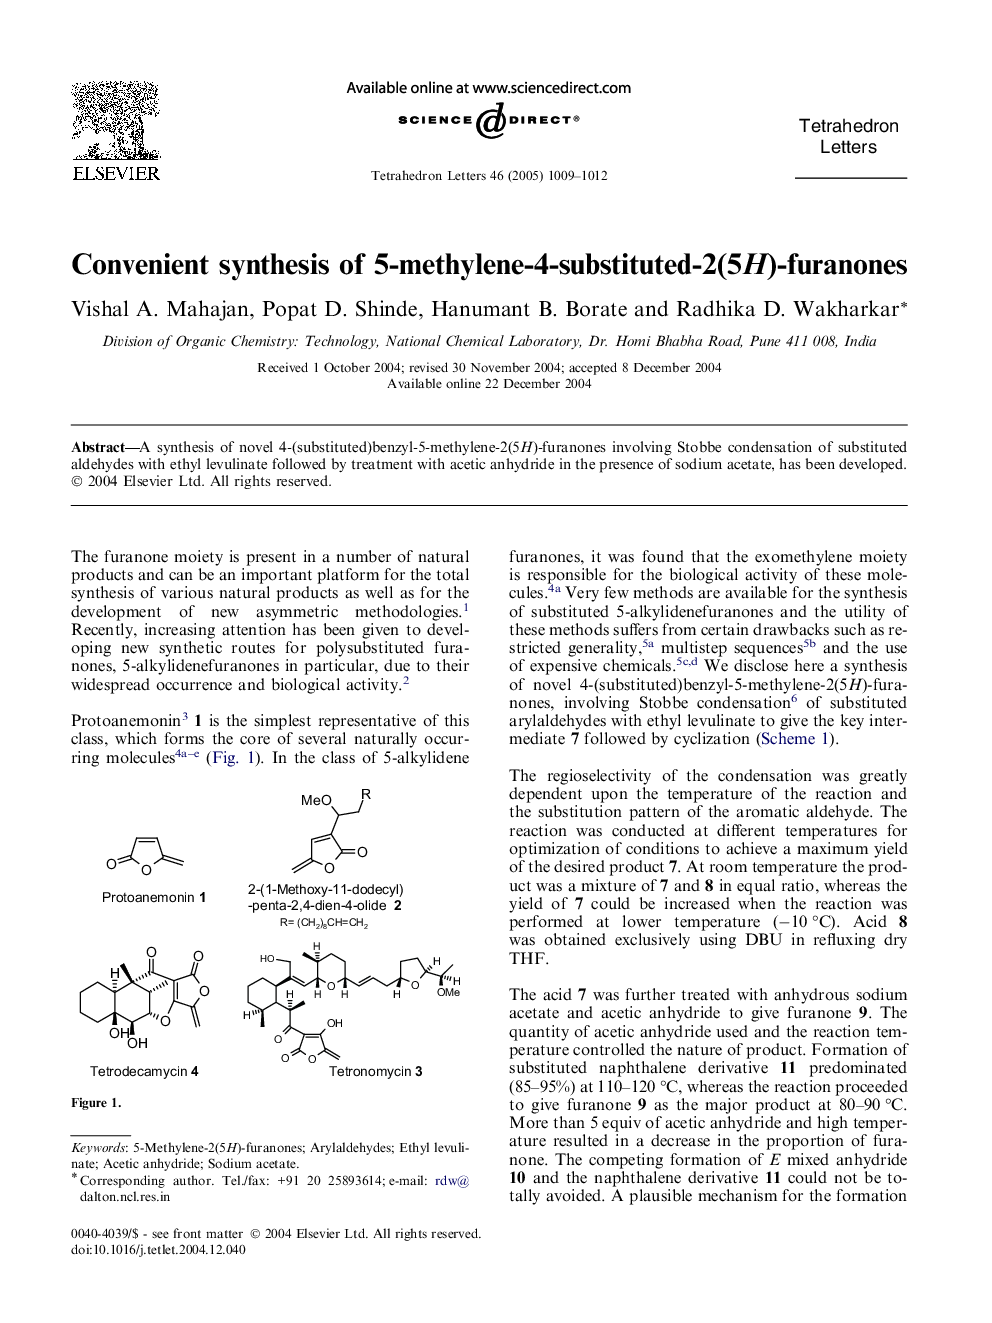 Convenient synthesis of 5-methylene-4-substituted-2(5H)-furanones